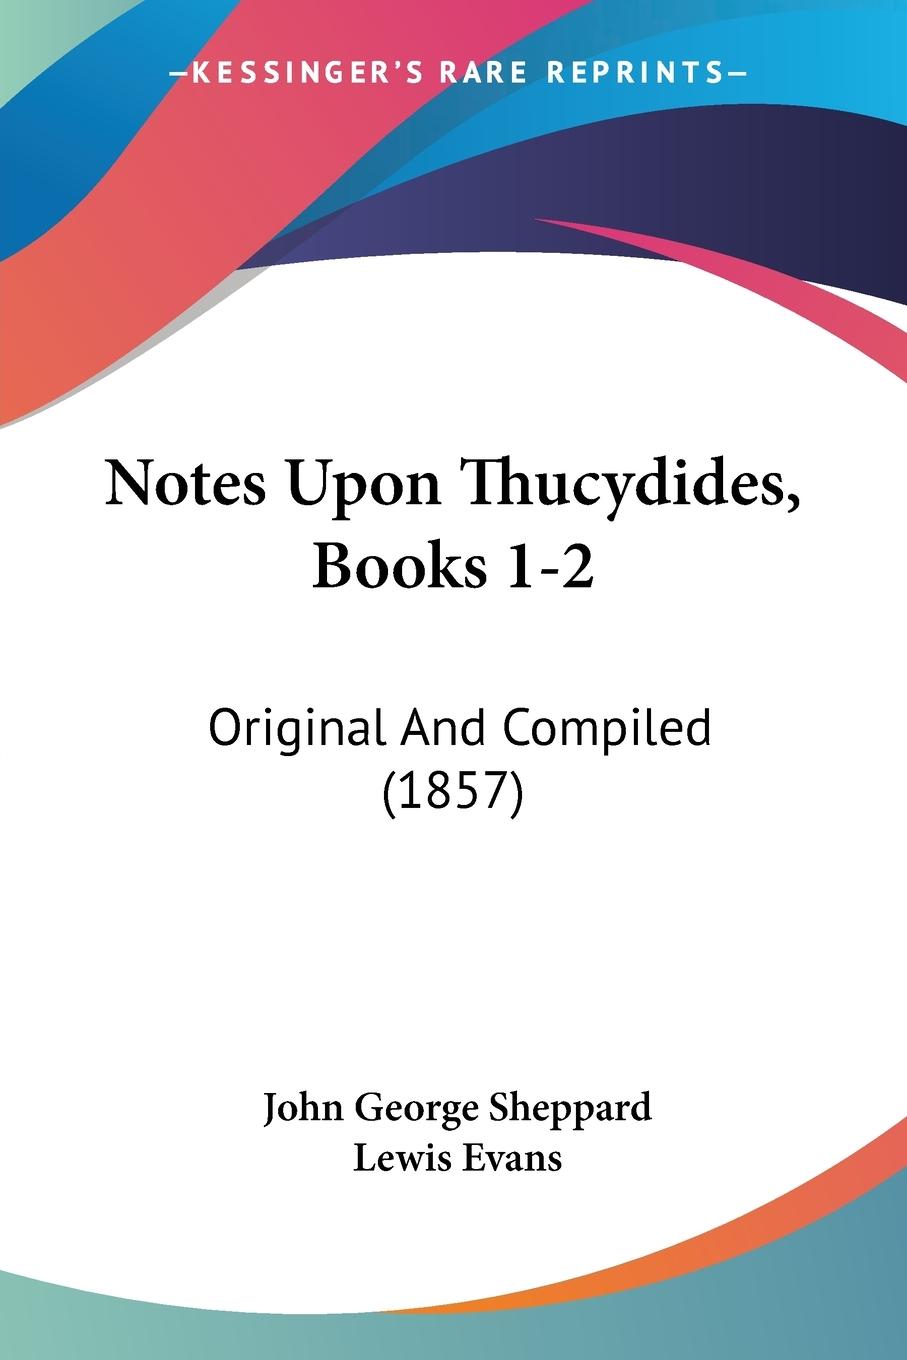 Notes Upon Thucydides, Books 1-2 - Sheppard, John George Evans, Lewis